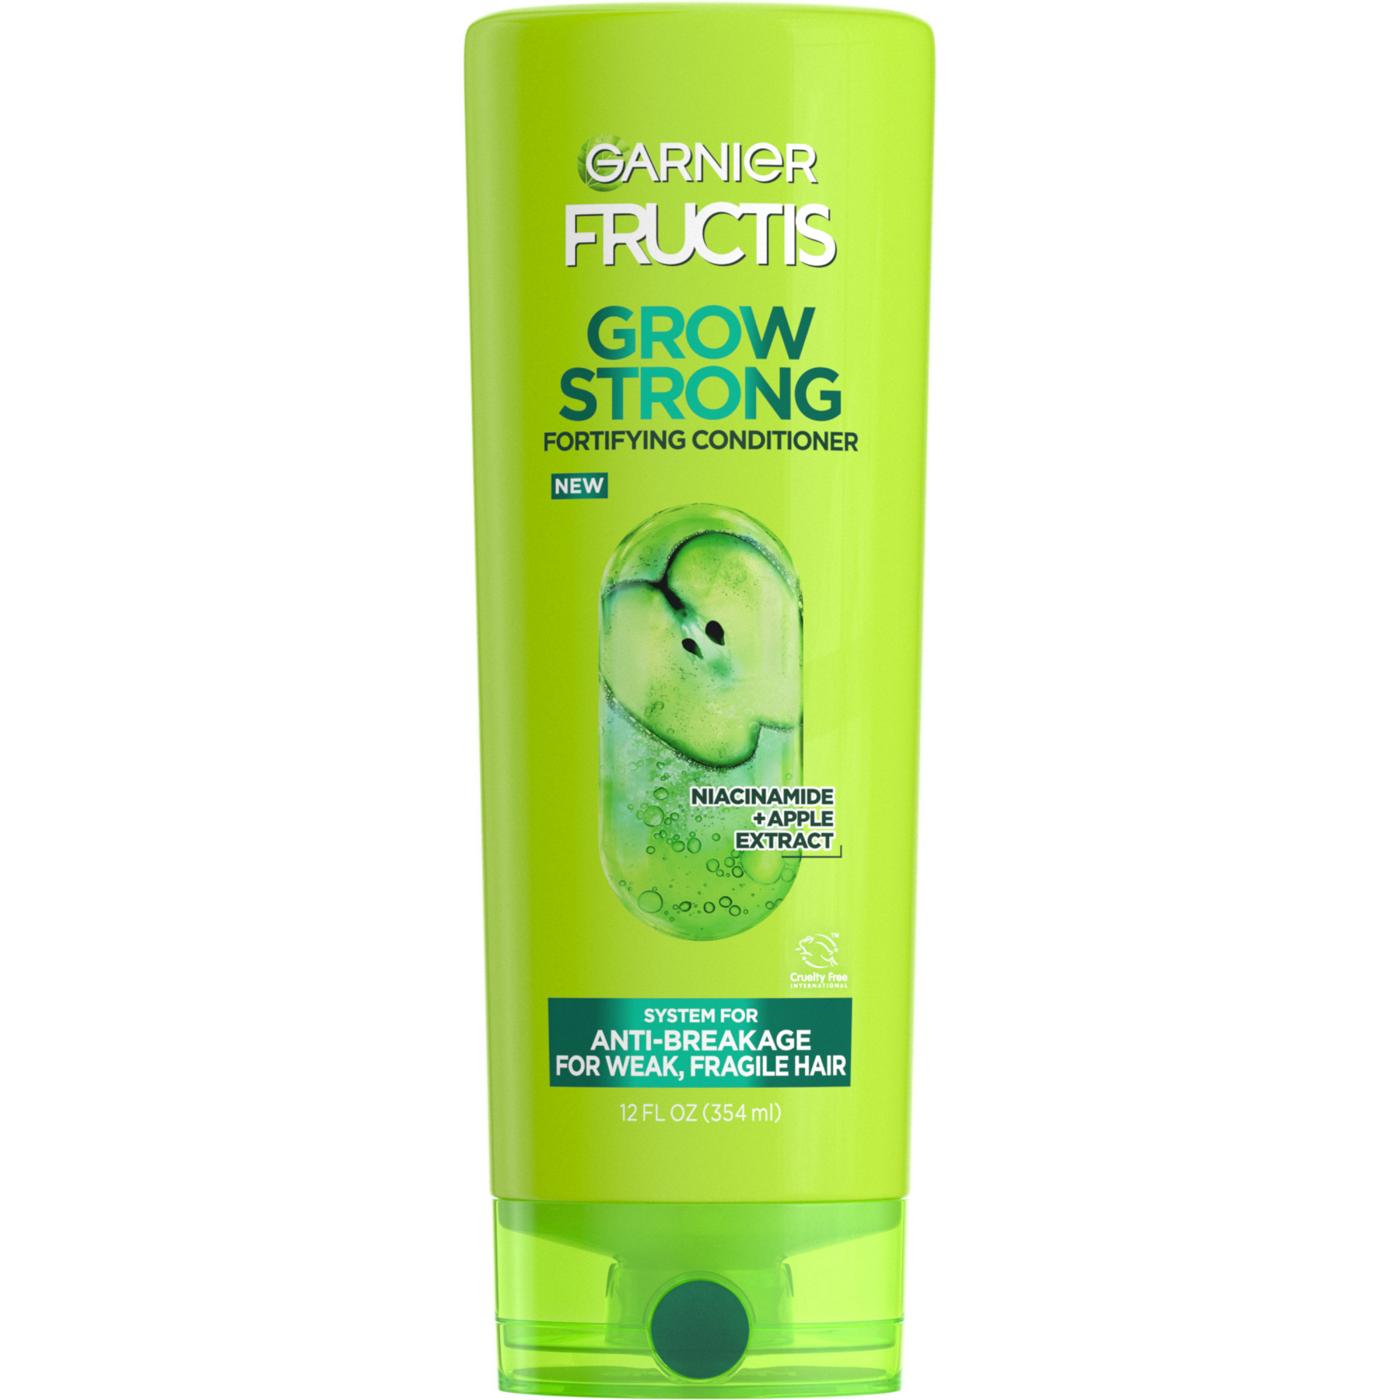 Garnier Fructis Grow Strong Fortifying Conditioner; image 1 of 8